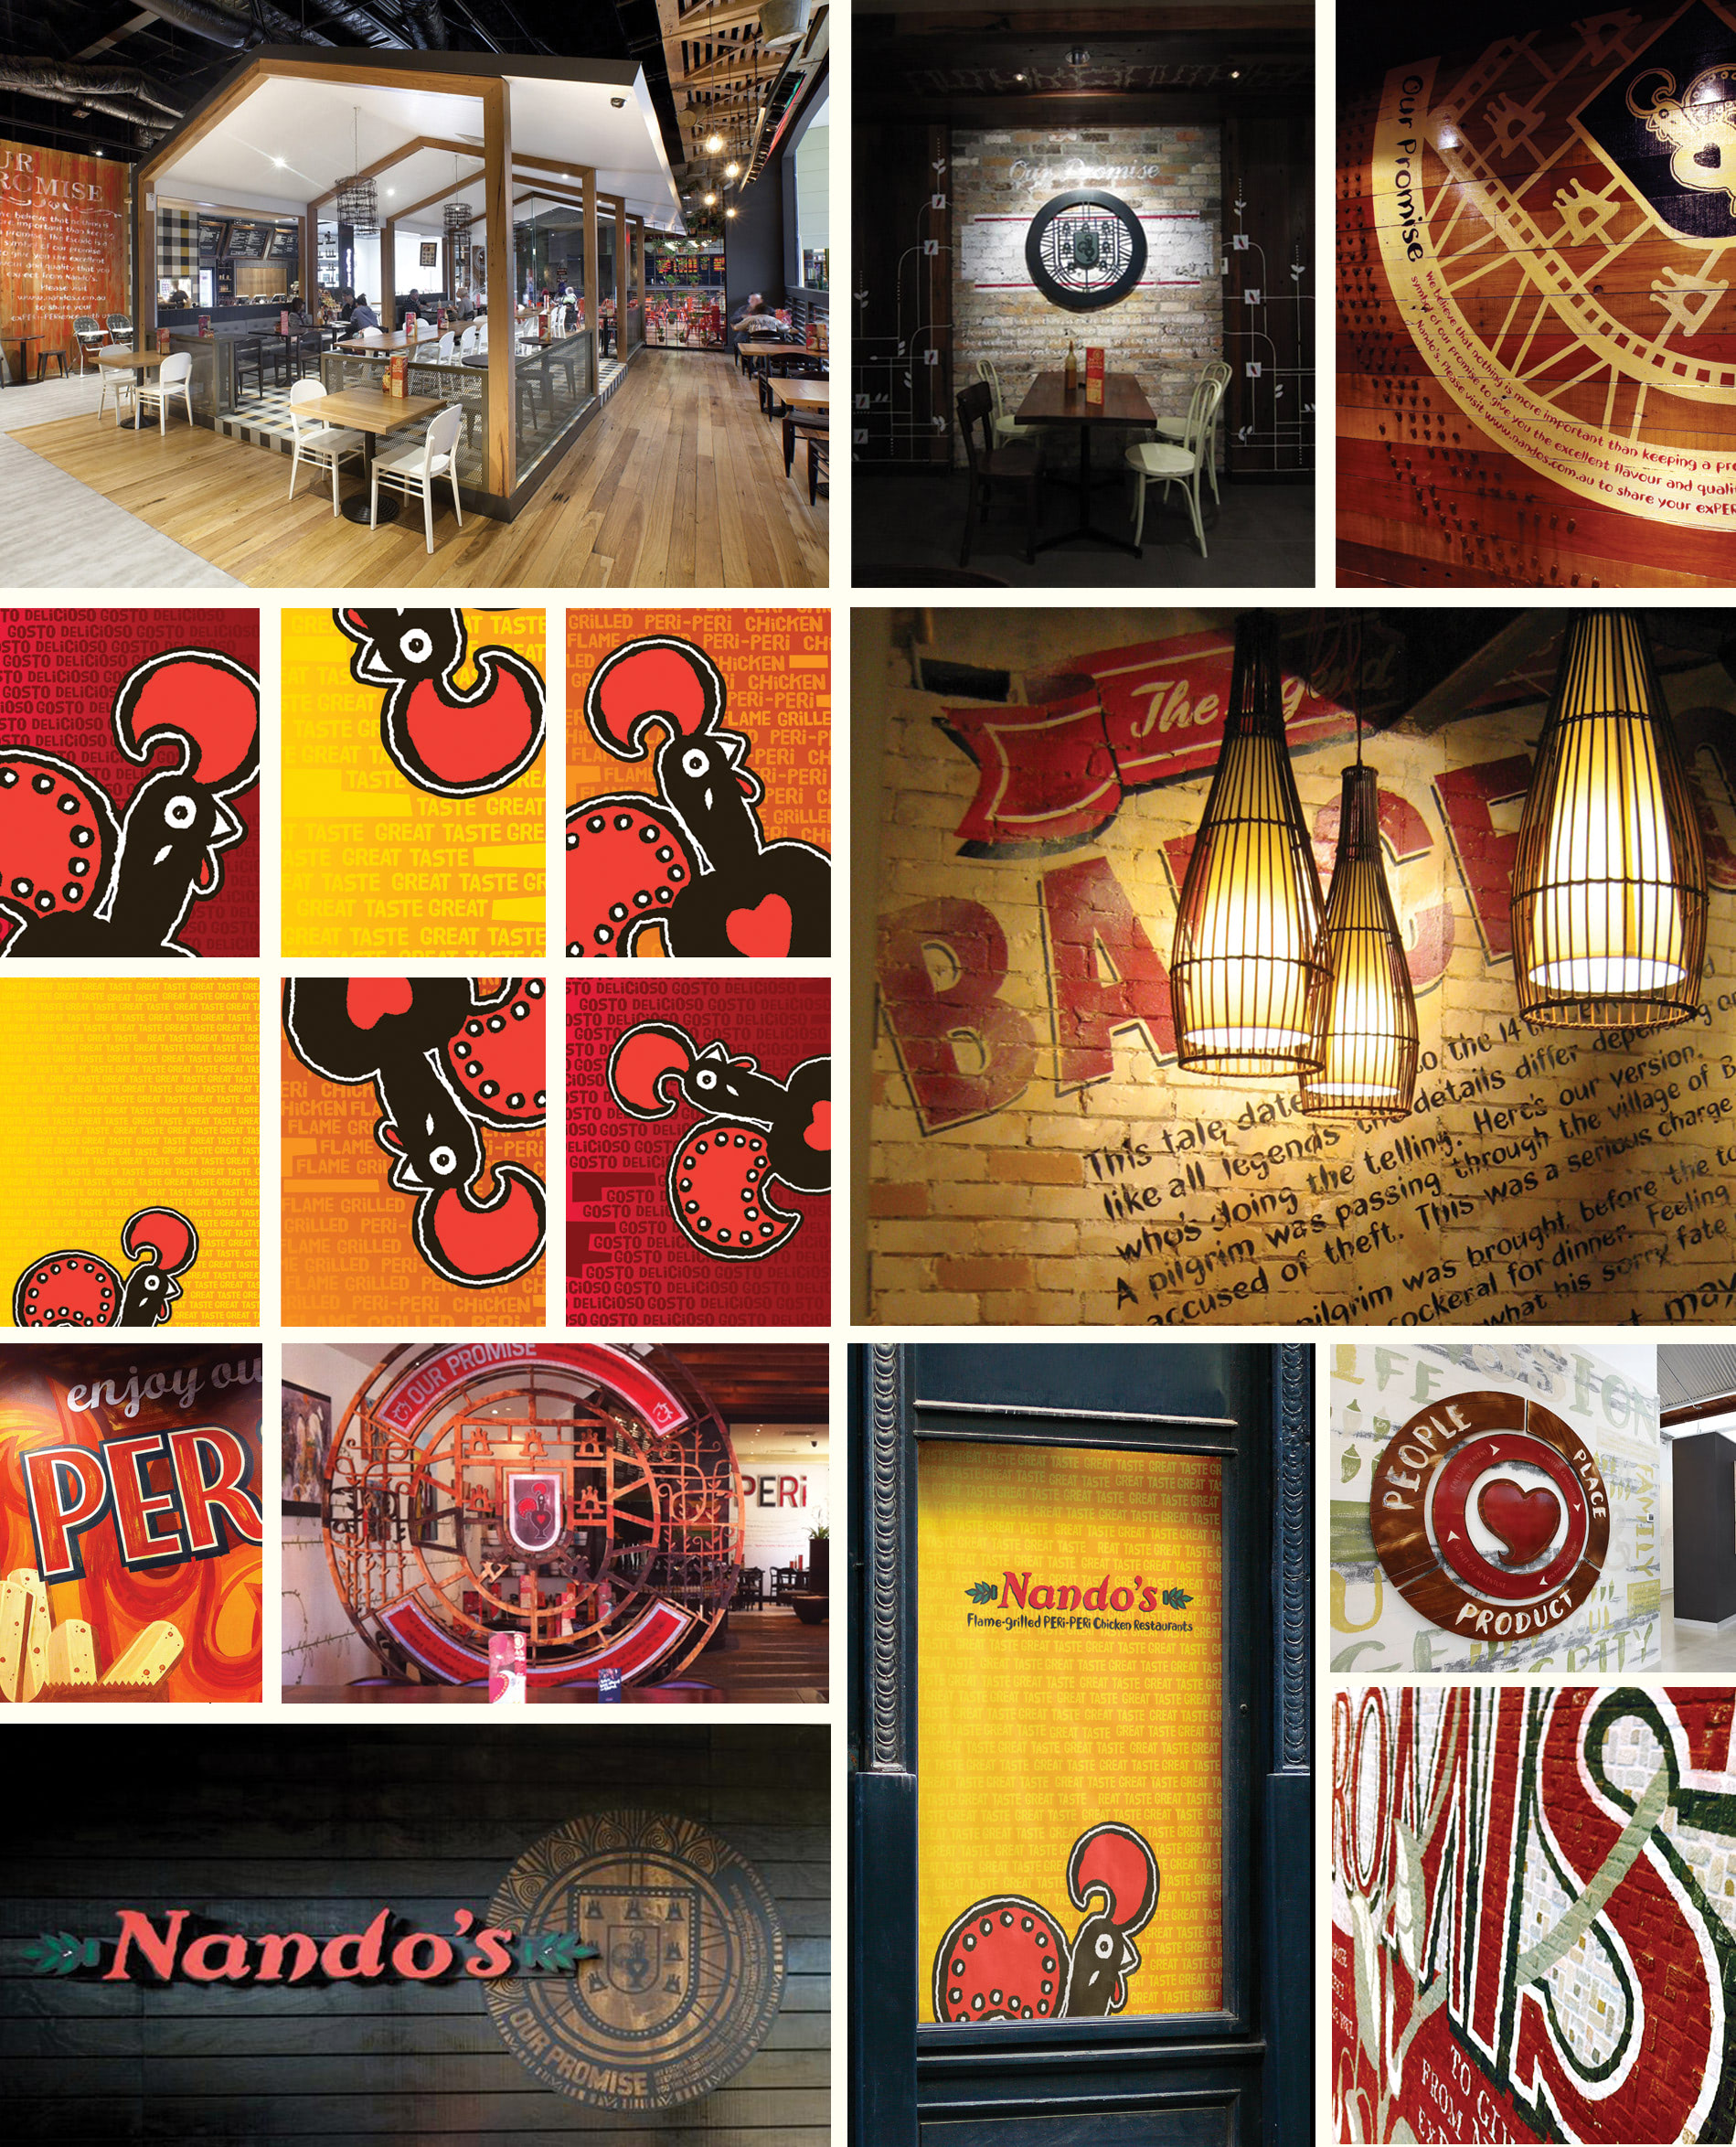 selection of illustrations, wall graphics and designs for restaurant